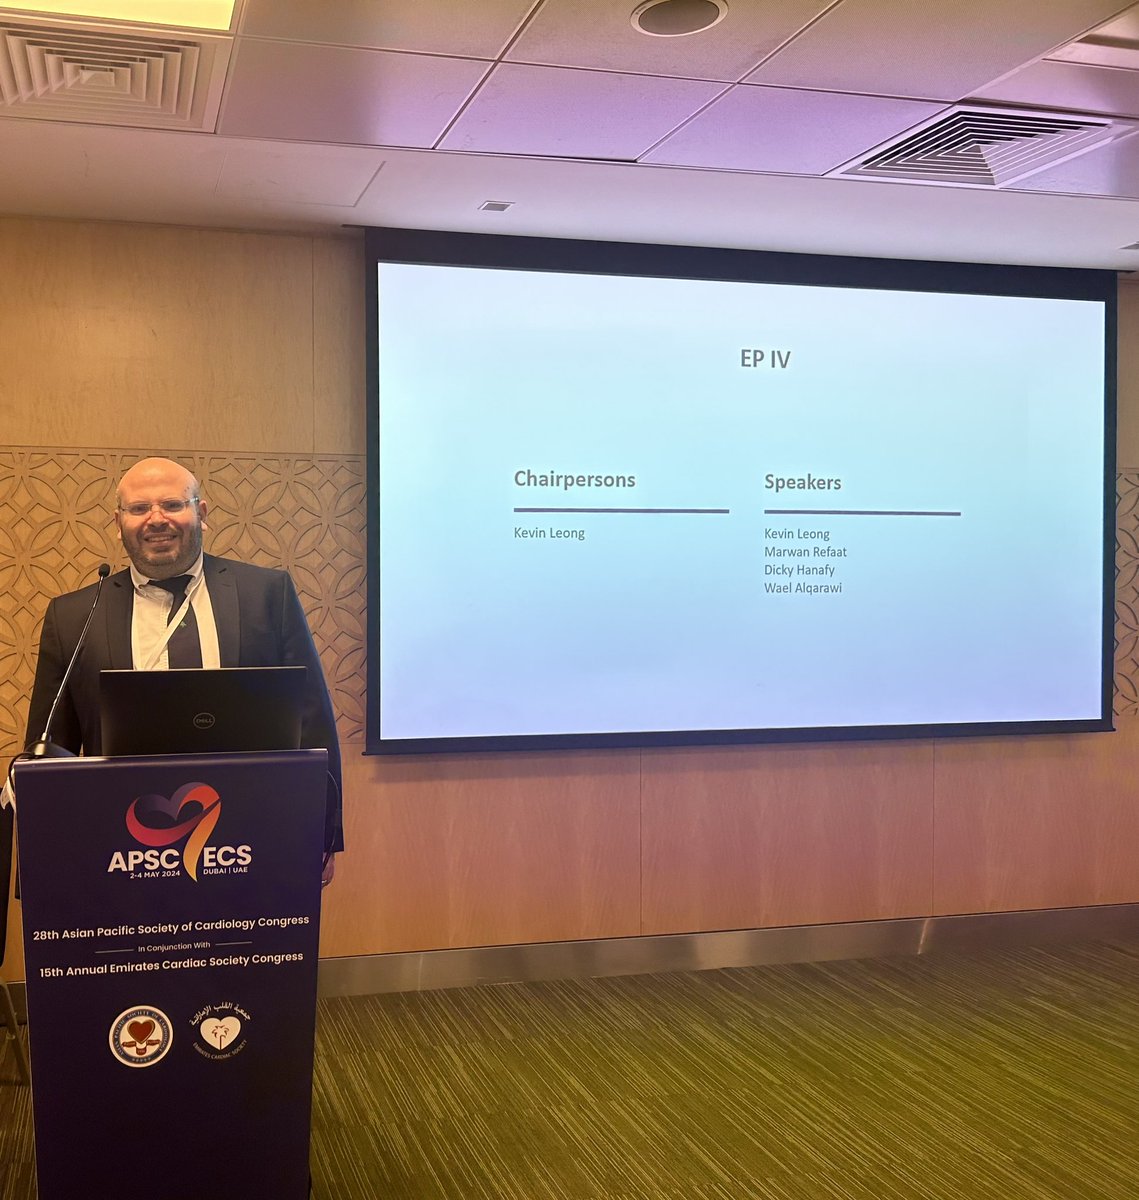 Honored to present at the @apsc_office and @CardiacSociety meeting in the inherited cardiac disorders session in Dubai .Thanks Dr @wmahmeed for the invitation. @AUBMC_Official @AUB_FM @AUB_Lebanon #cardiomyopathy #channelopathy #genetics #arrhythmias #heart